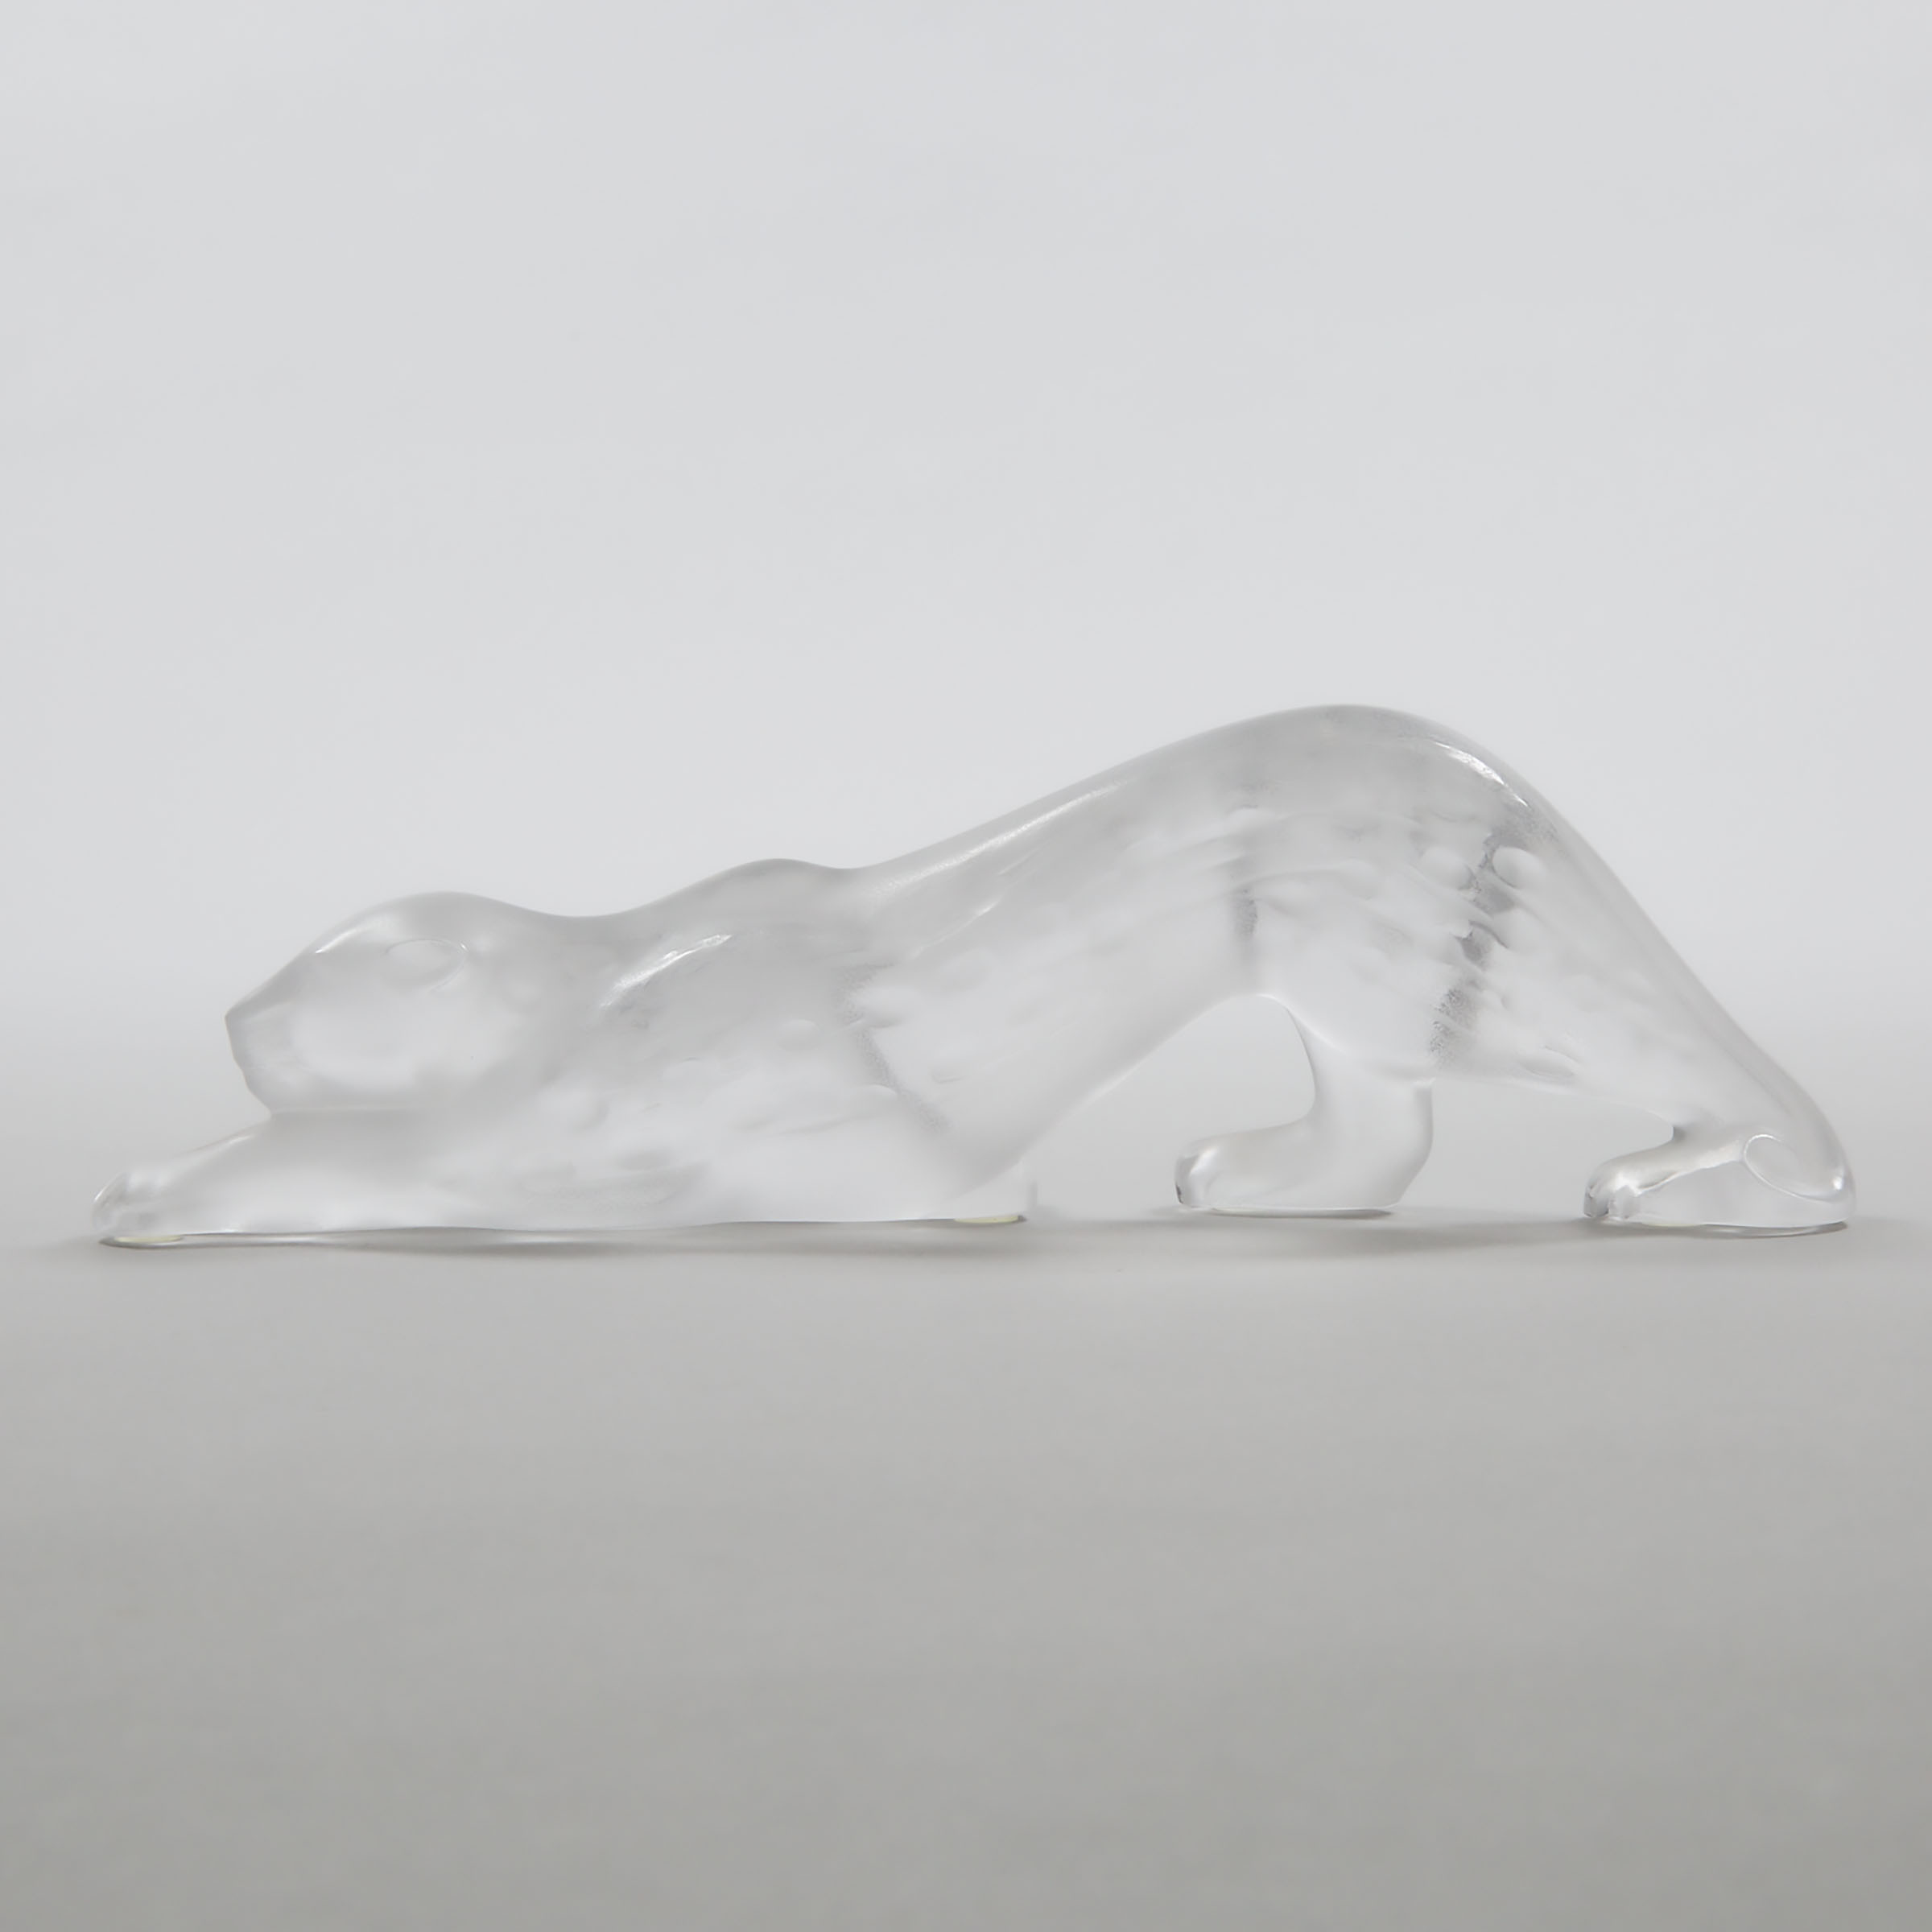 'Zeila', Lalique Moulded and Frosted Glass Creeping Leopard, post-1978